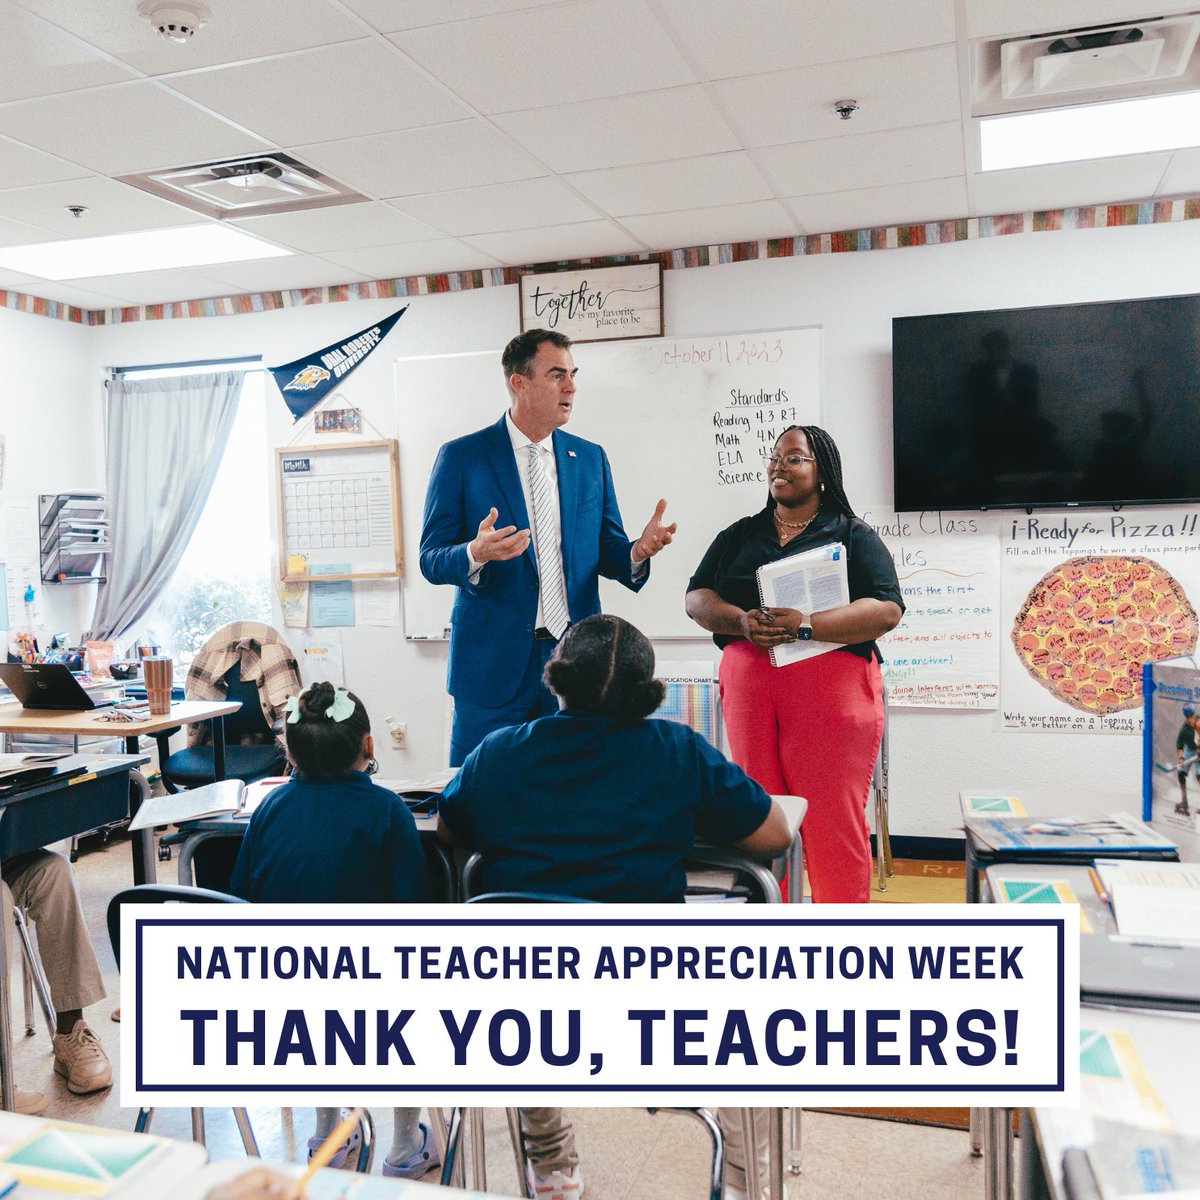 We know a teacher’s impact goes far beyond the classroom, that’s why I’m proud we have invested more in public education in the last 5 years than in the 25 years before me. I was so glad to recognize National Teacher Appreciation Week in Oklahoma. Thank you, educators!